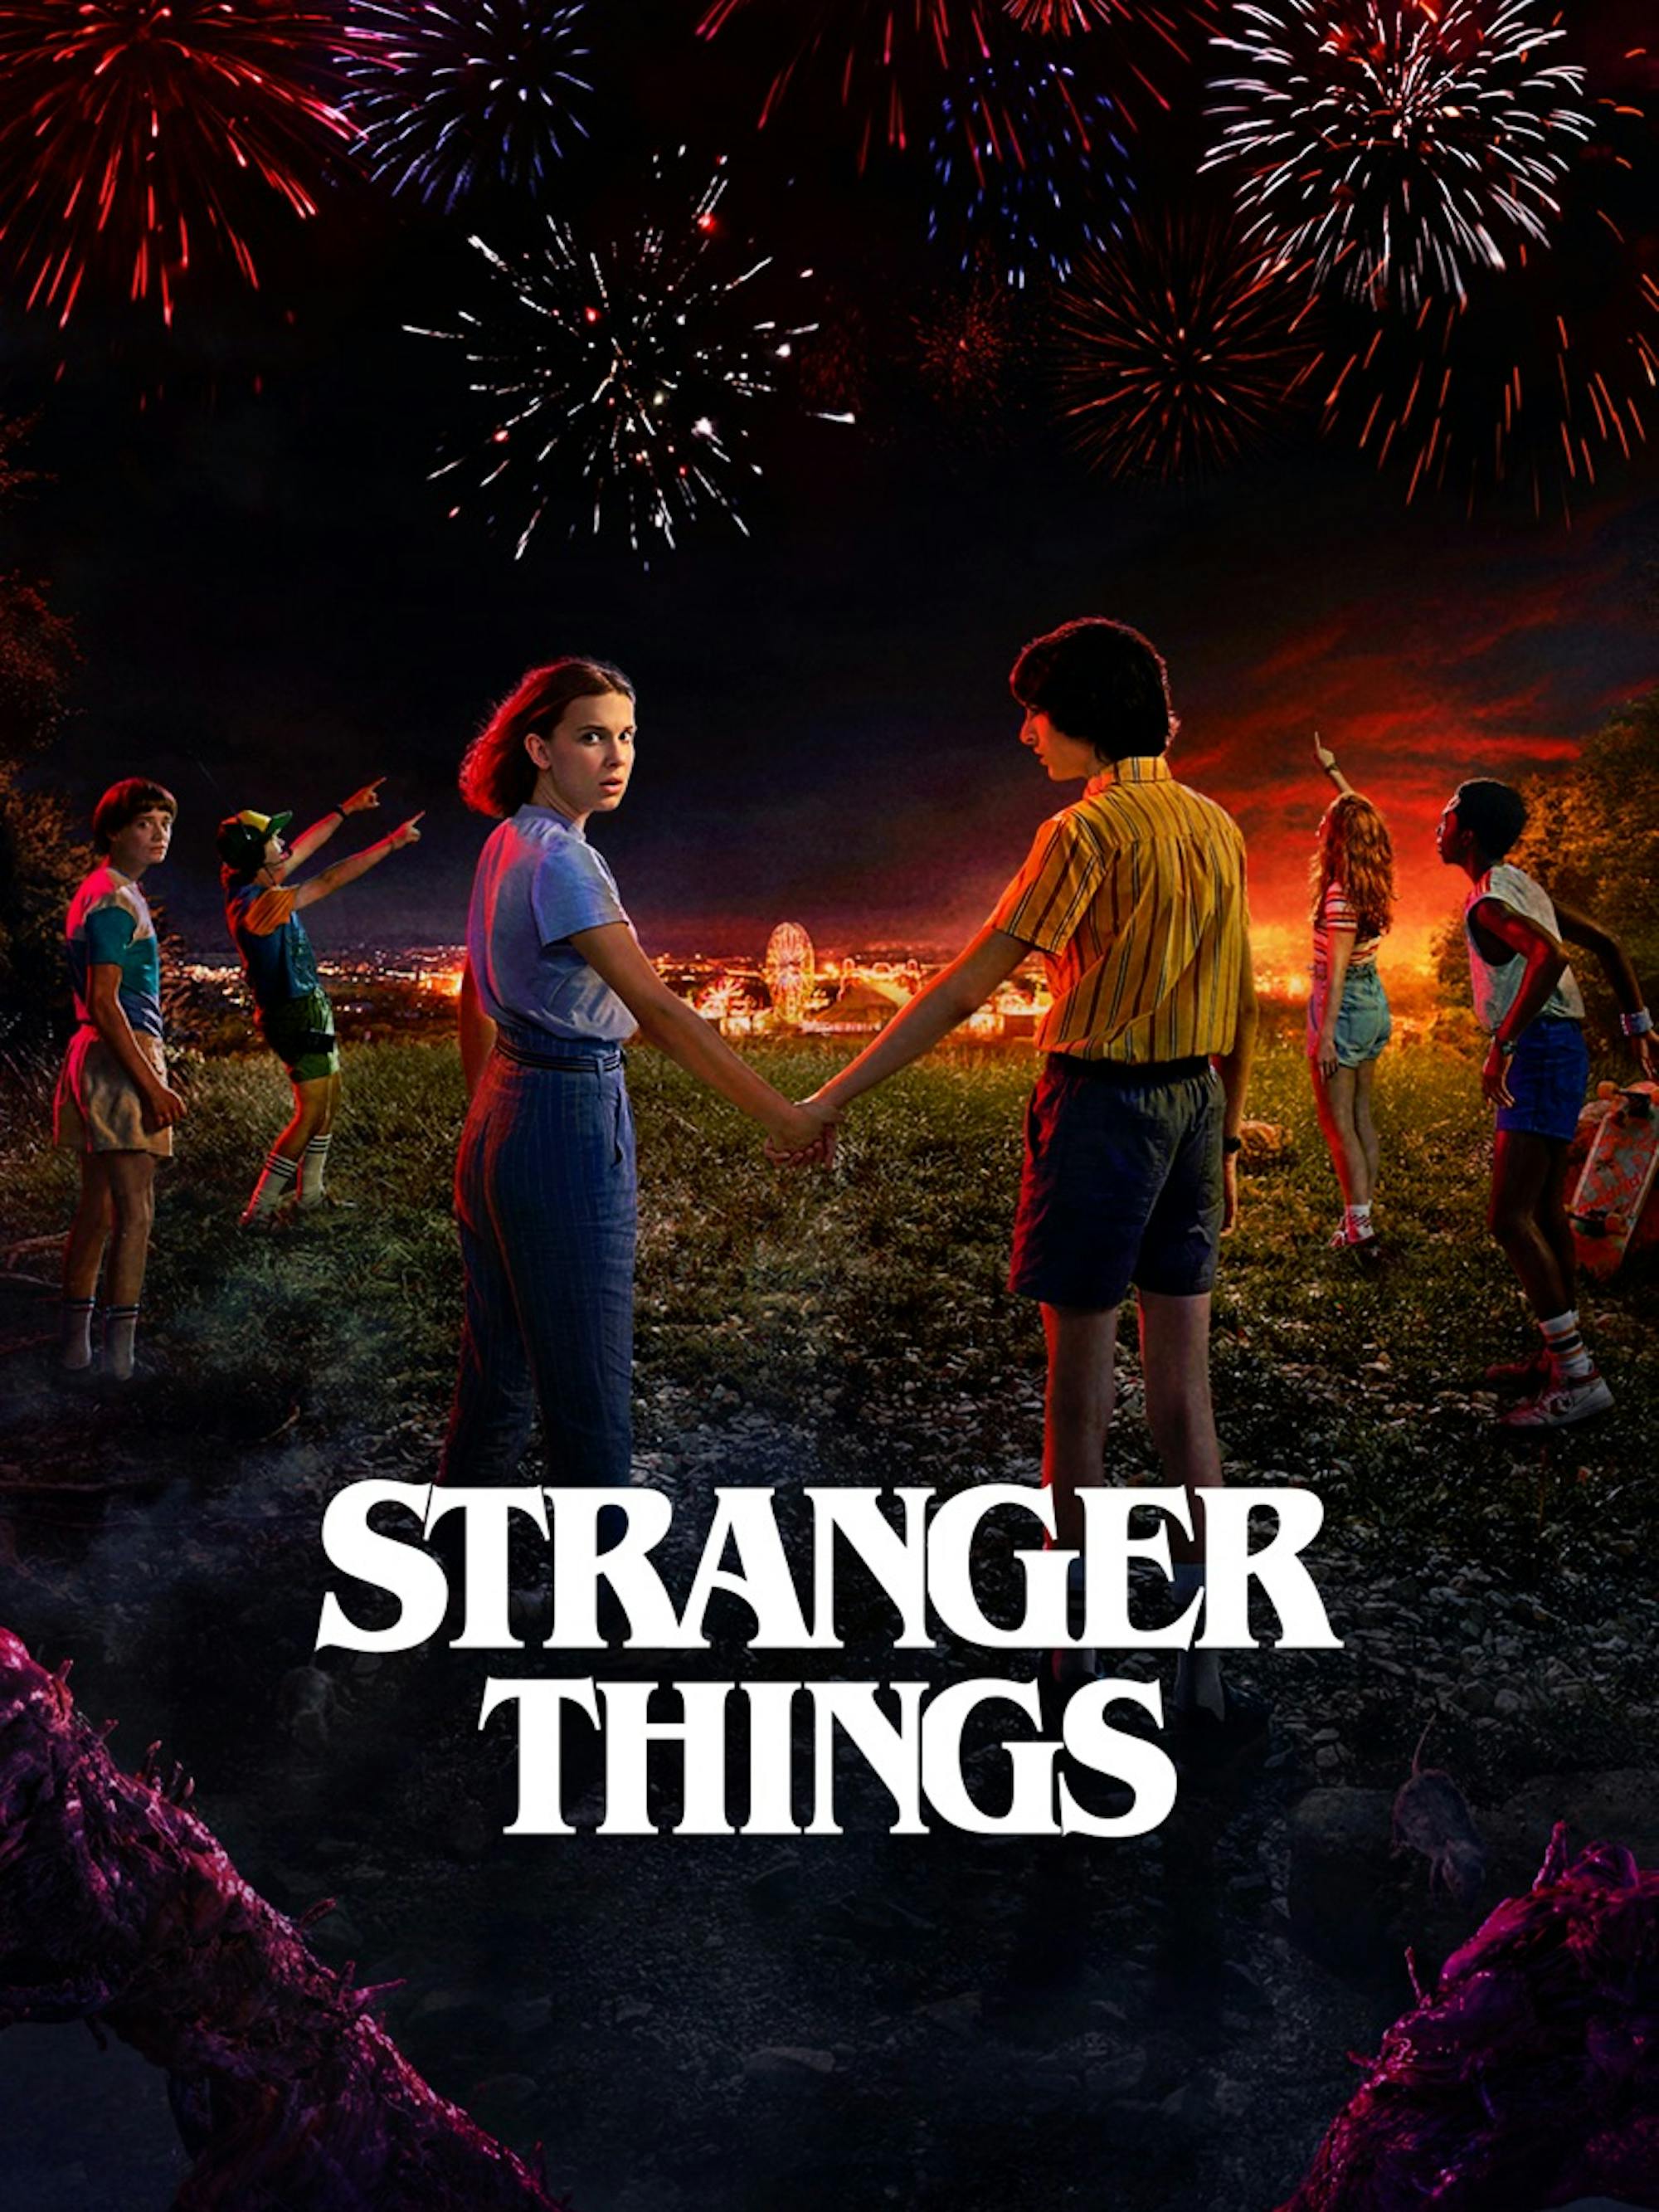 In a field lit from above by fireworks, 5 teens look up to the sky. One, as she holds another character’s hand, looks back at the camera with a sinister expression. The title reads below in white.